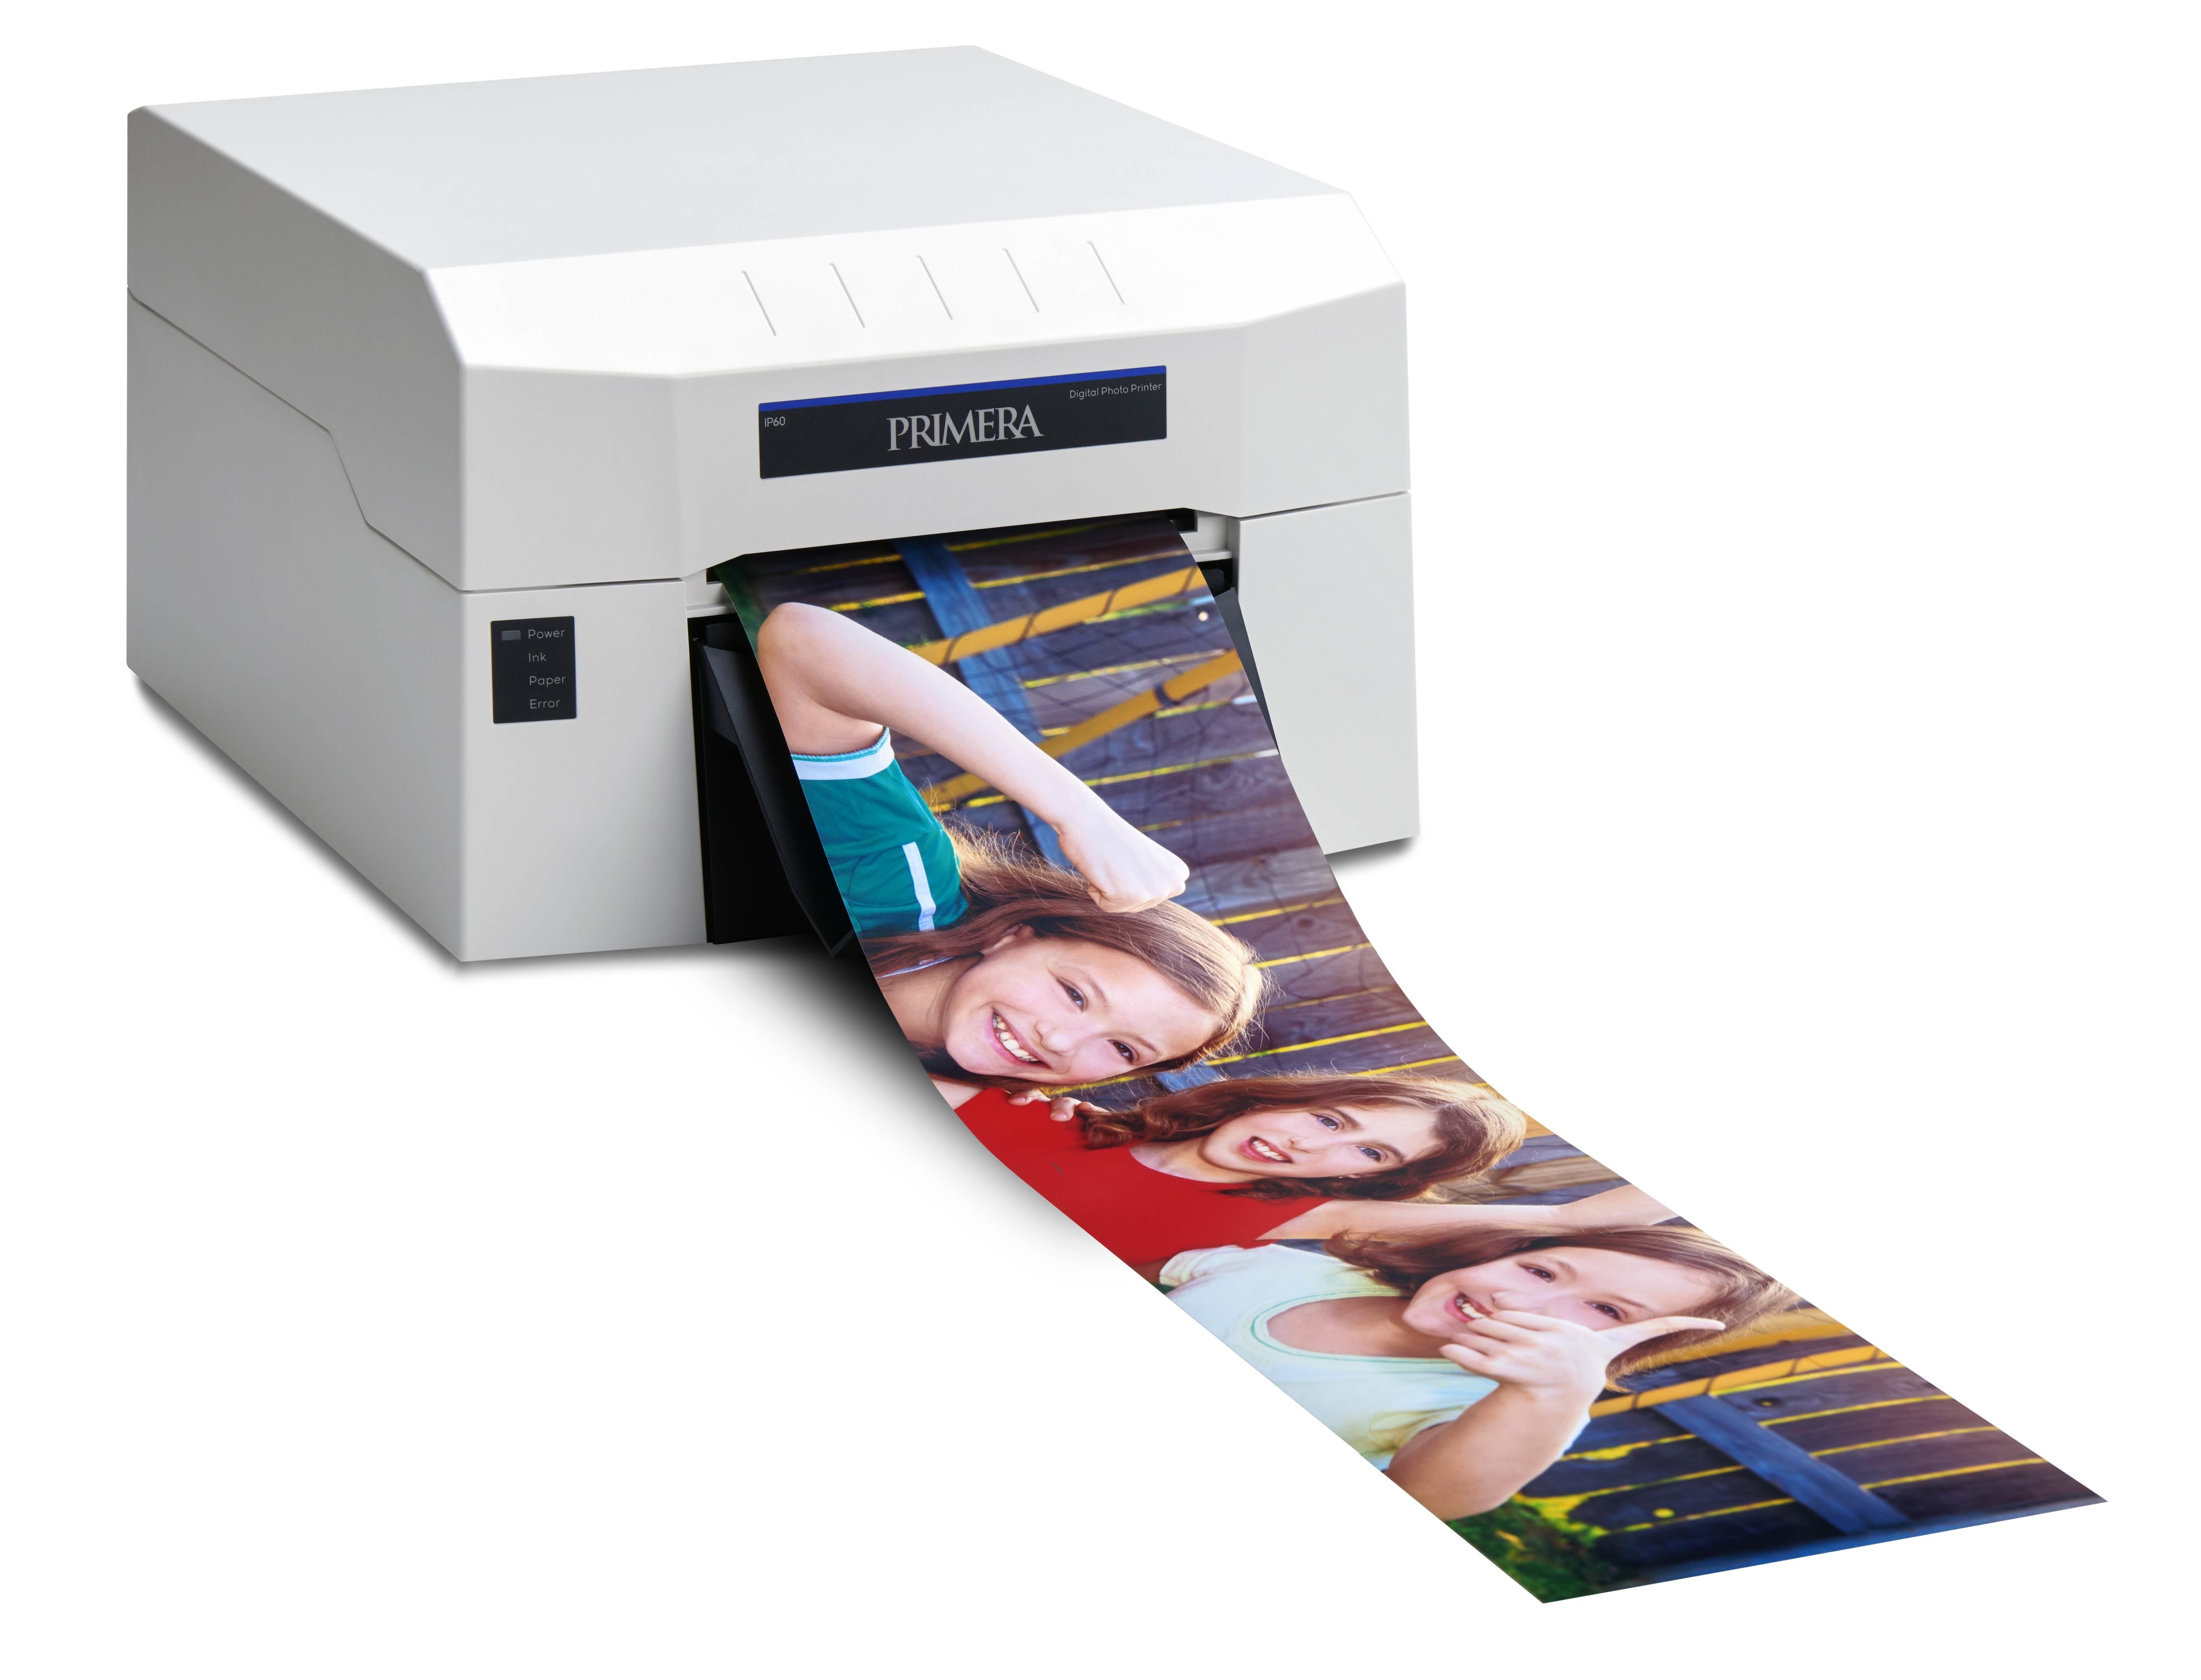 printer pooling wireless canon social booth